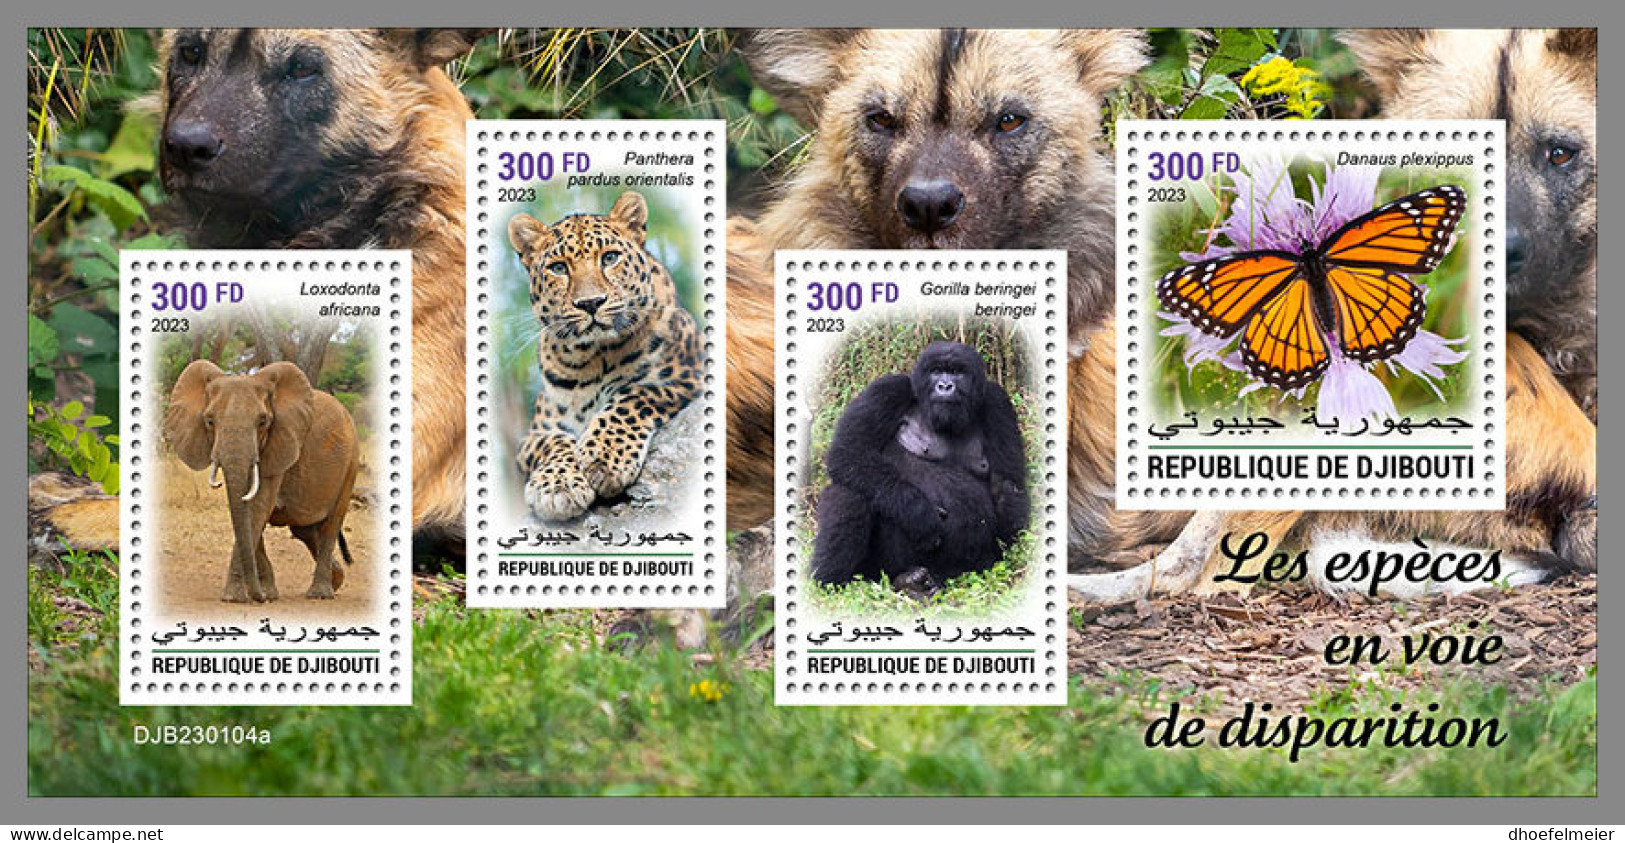 DJIBOUTI 2023 MNH Gorilla Endangered Species M/S - OFFICIAL ISSUE - DHQ2326 - Gorillas